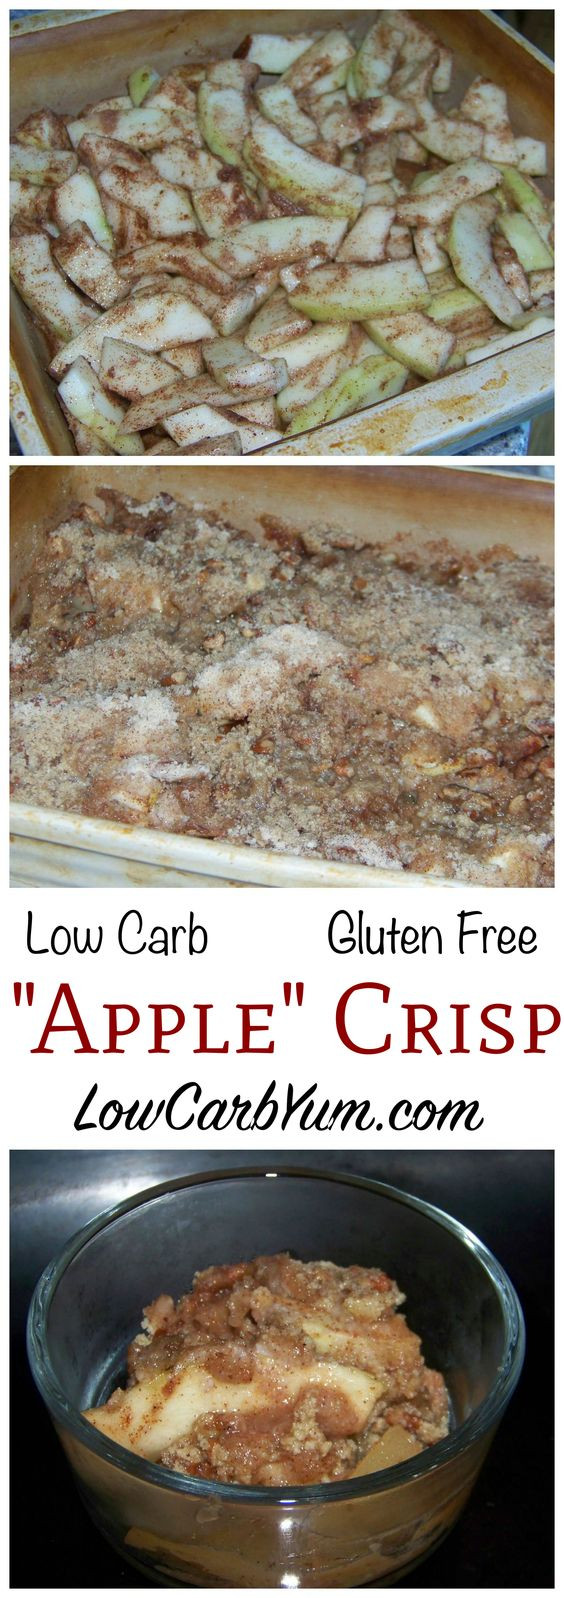 Low Carb Apple Recipes
 Apple crisp Forbidden fruit and Low carb ts on Pinterest